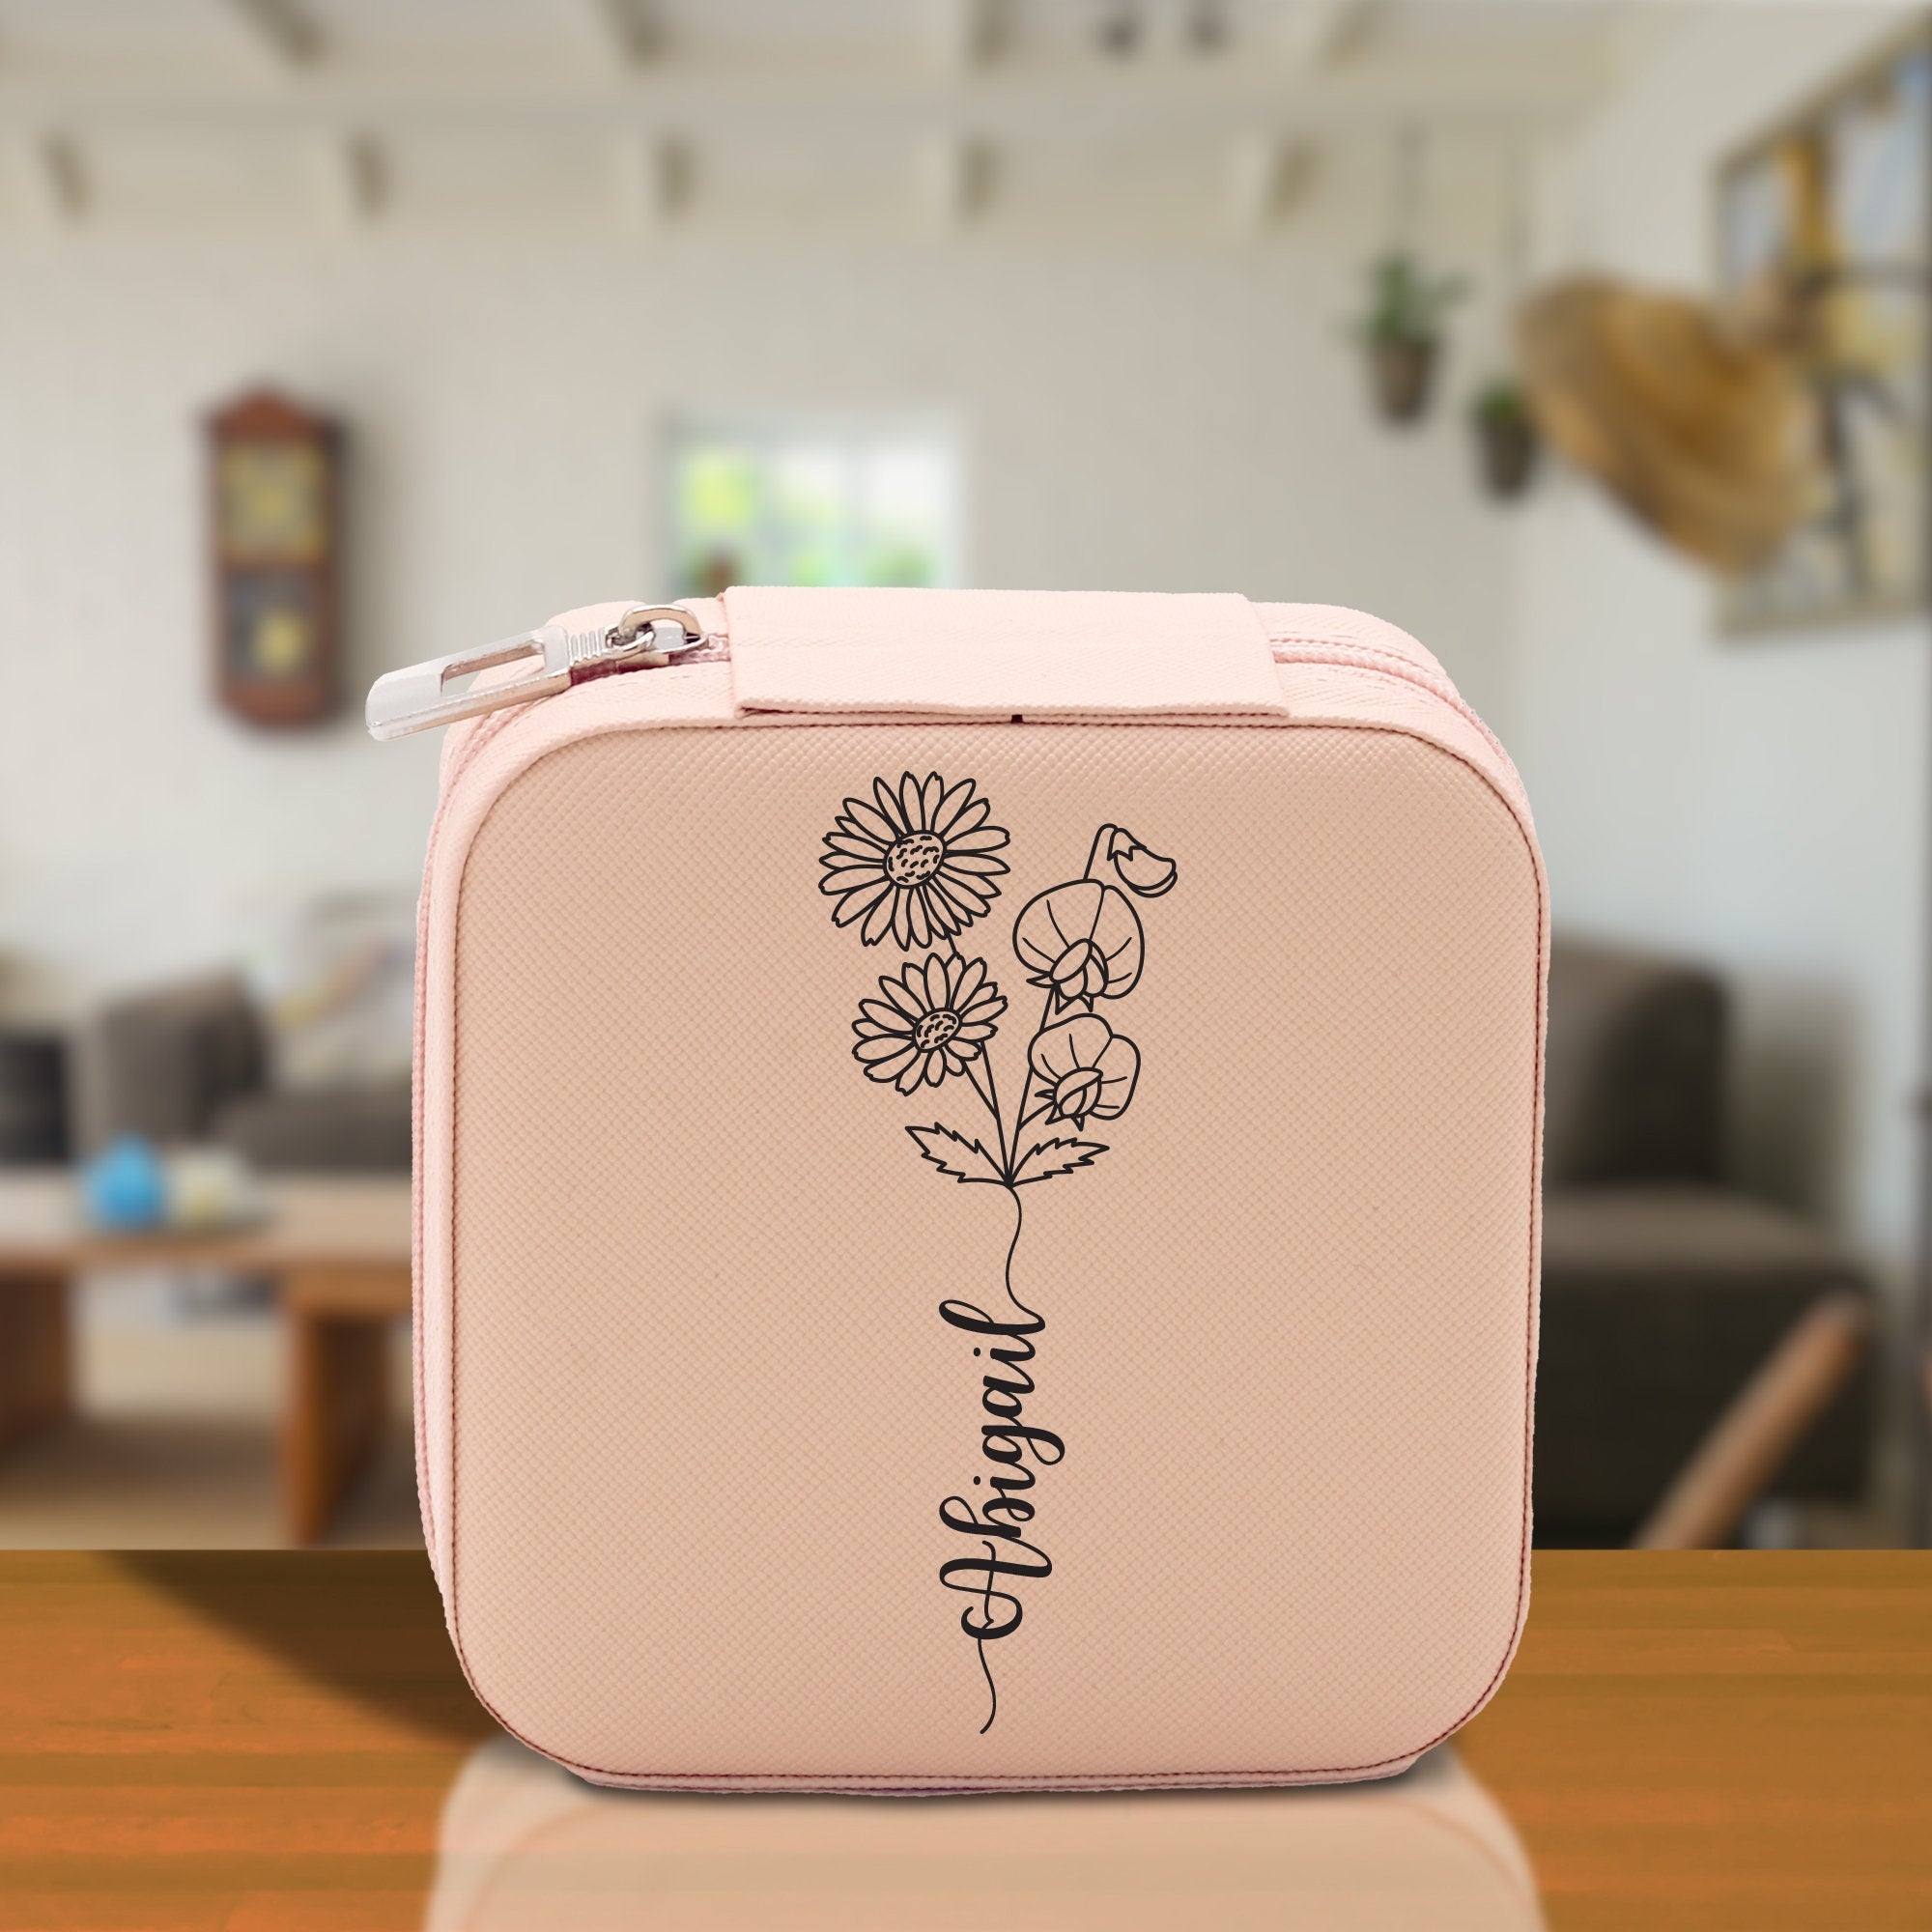 a pink lunch box with a flower drawn on it